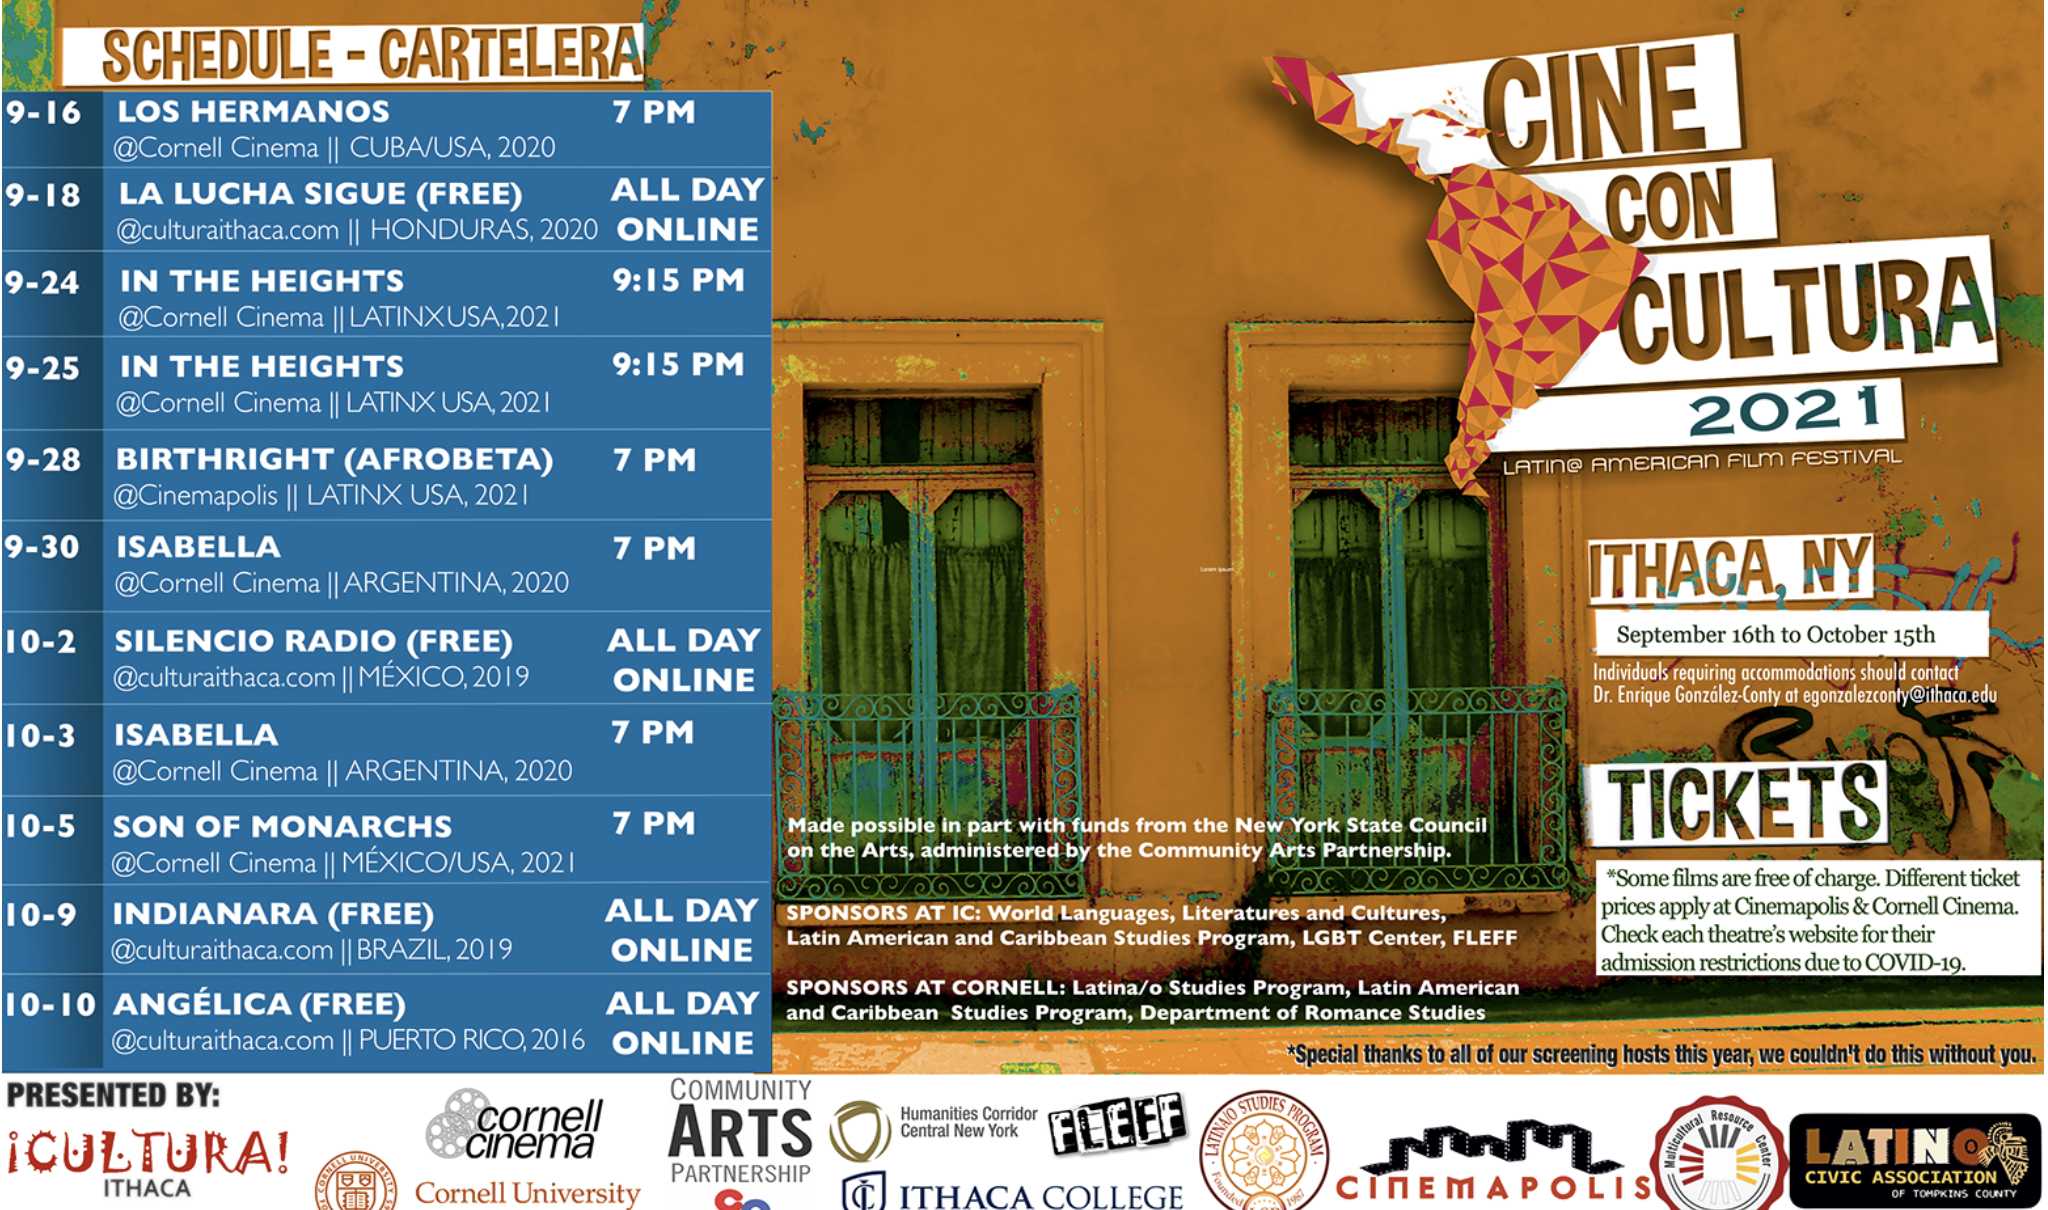 Poster for the 2021 Cine con Cultura film festival, including a list of films and showtimes